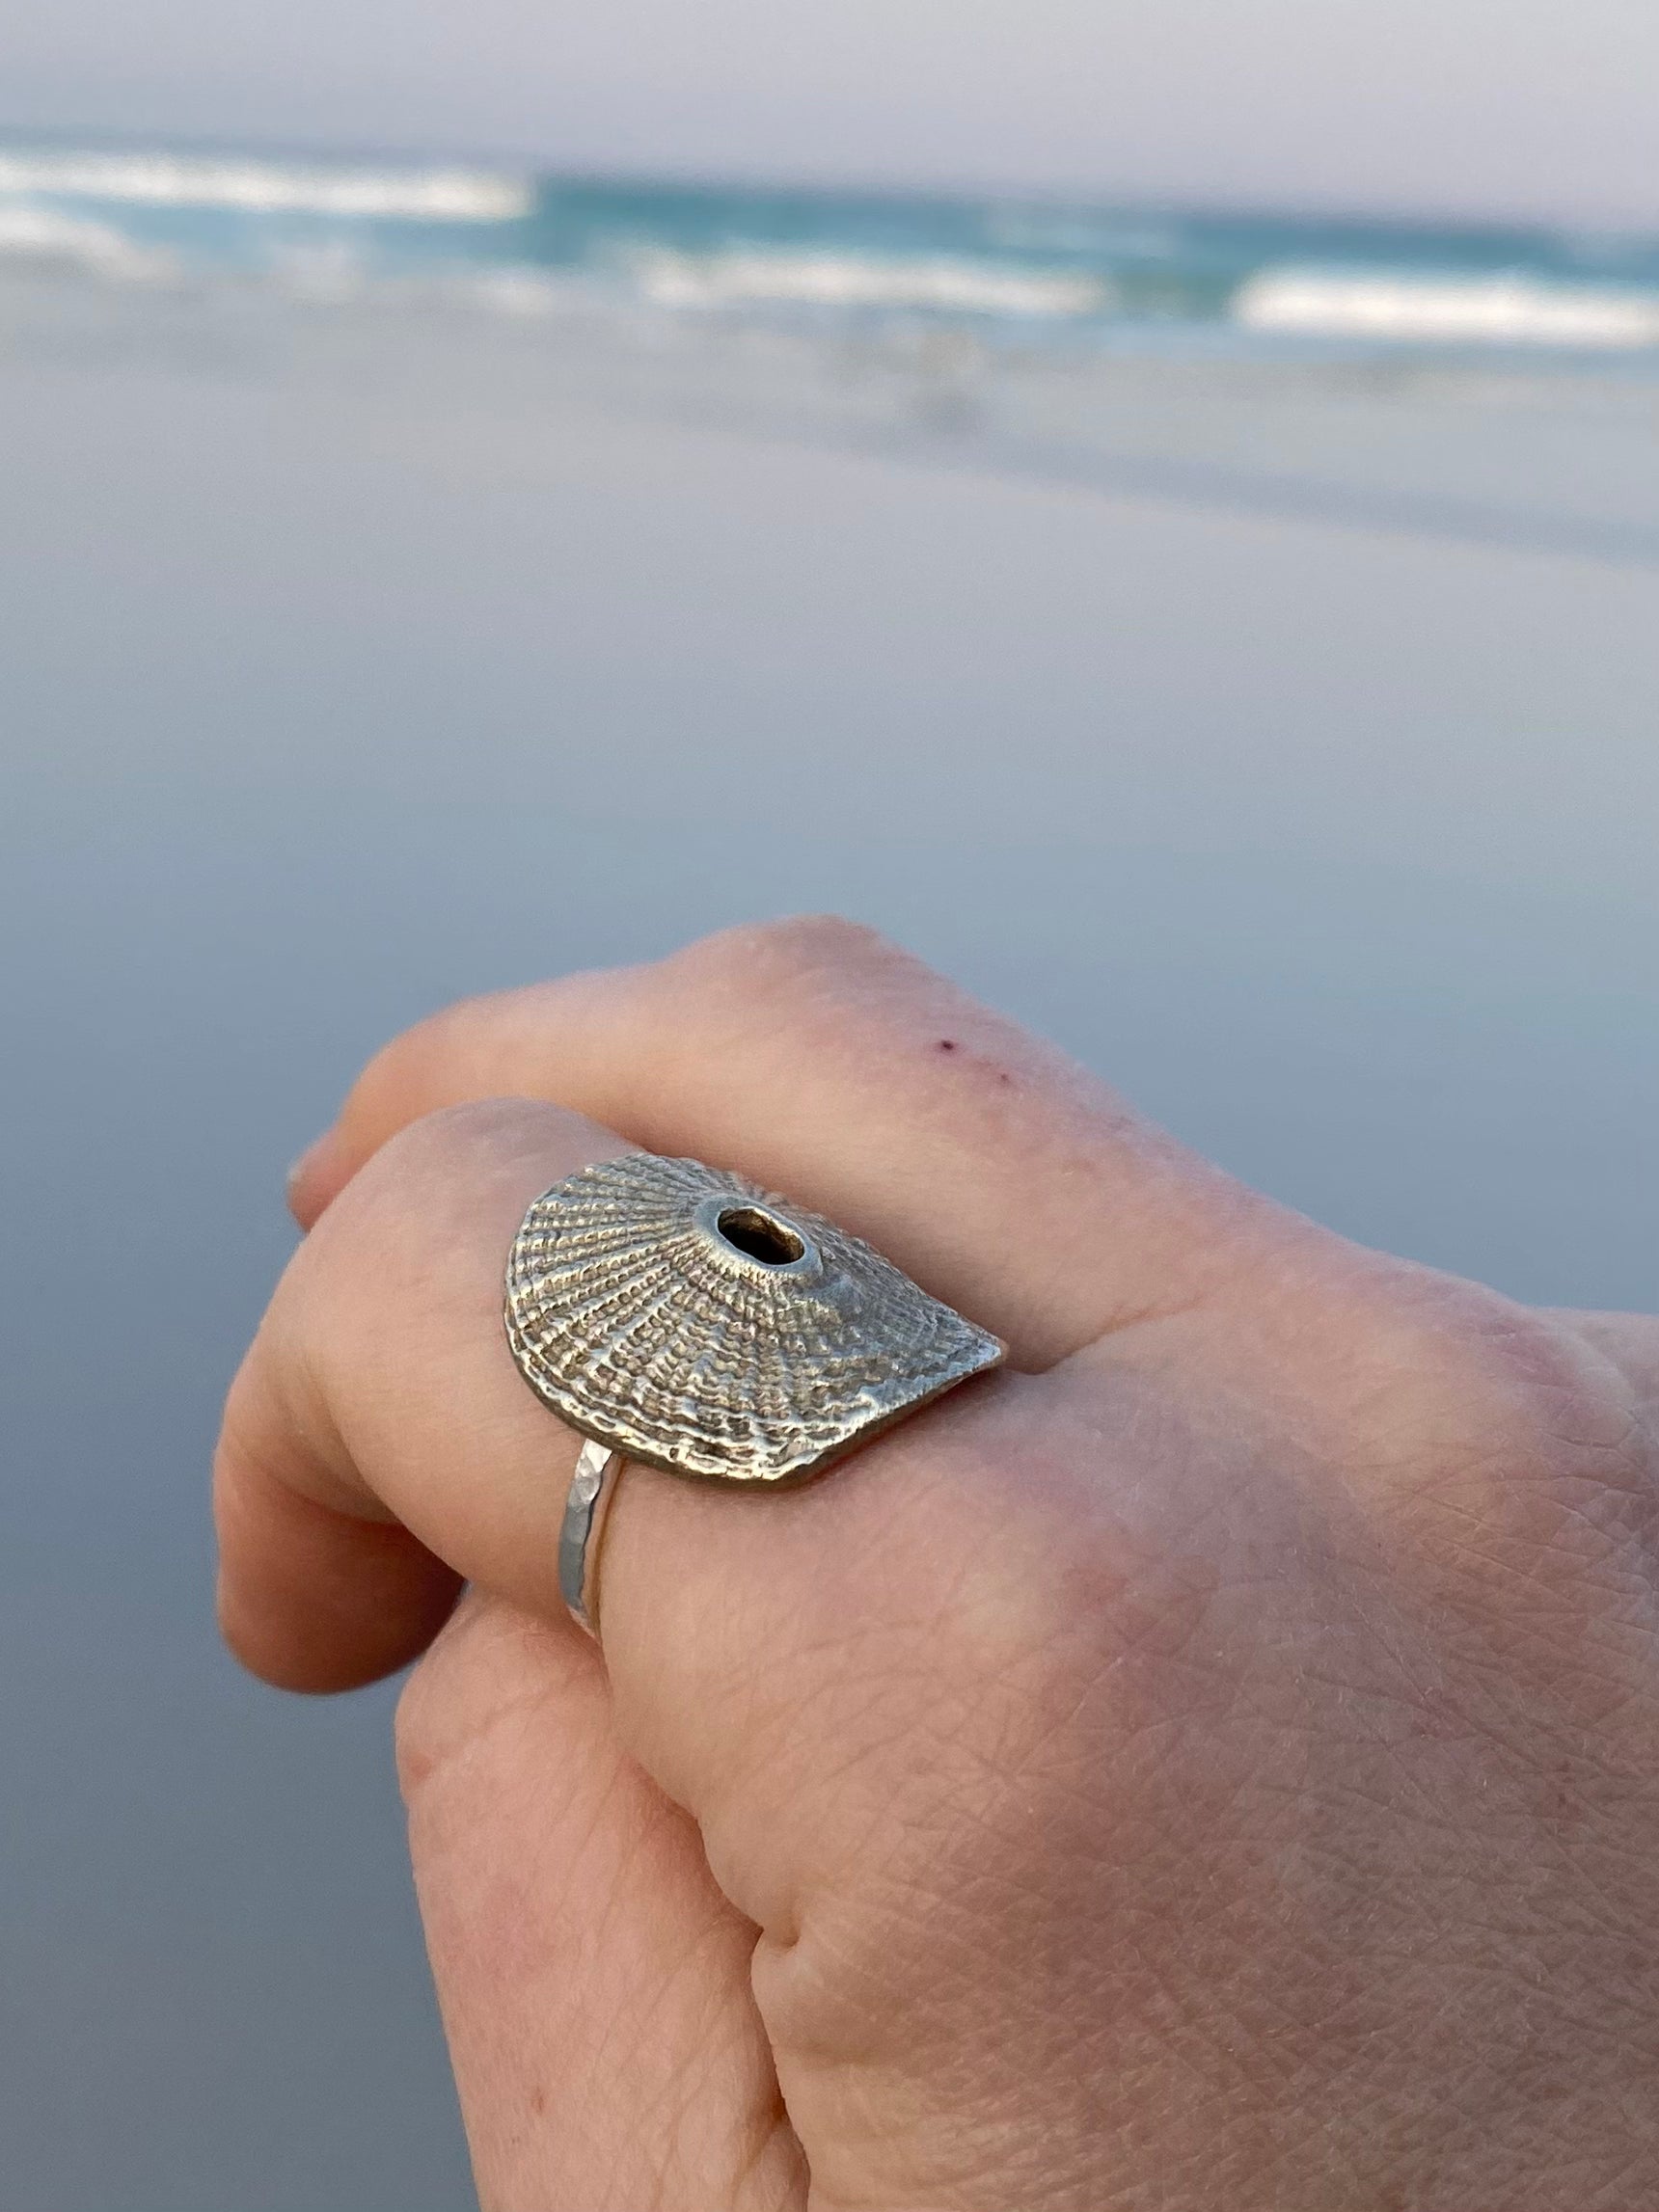 Silver Santa Maria shell ring showcased on a hand against a soft-focus seascape background.